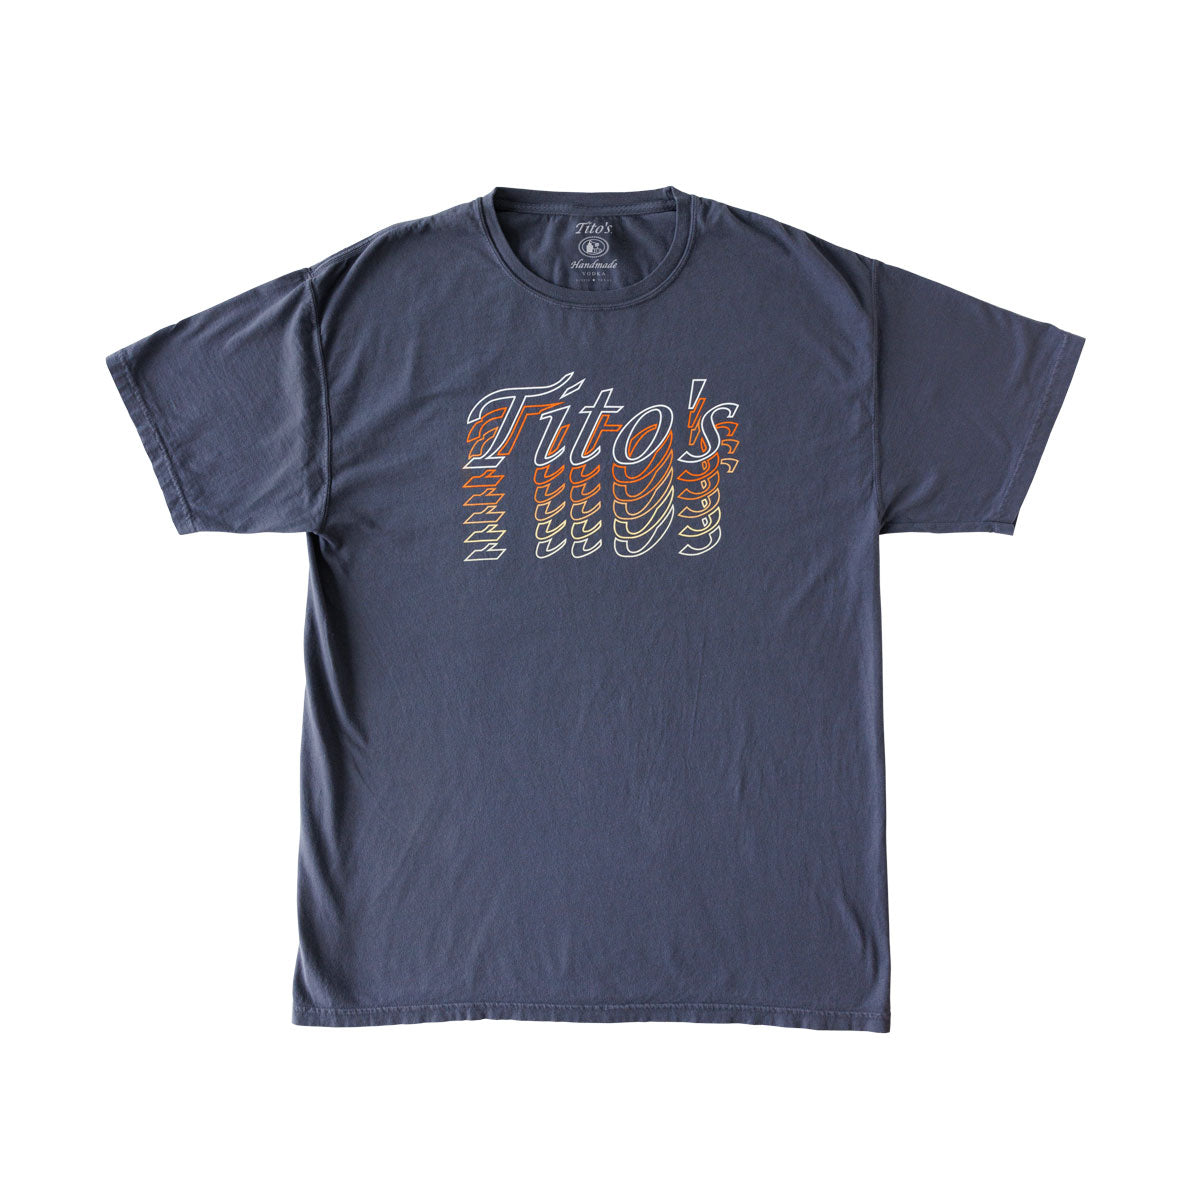 Slate blue short-sleeved t-shirt with gradient Tito's wordmark